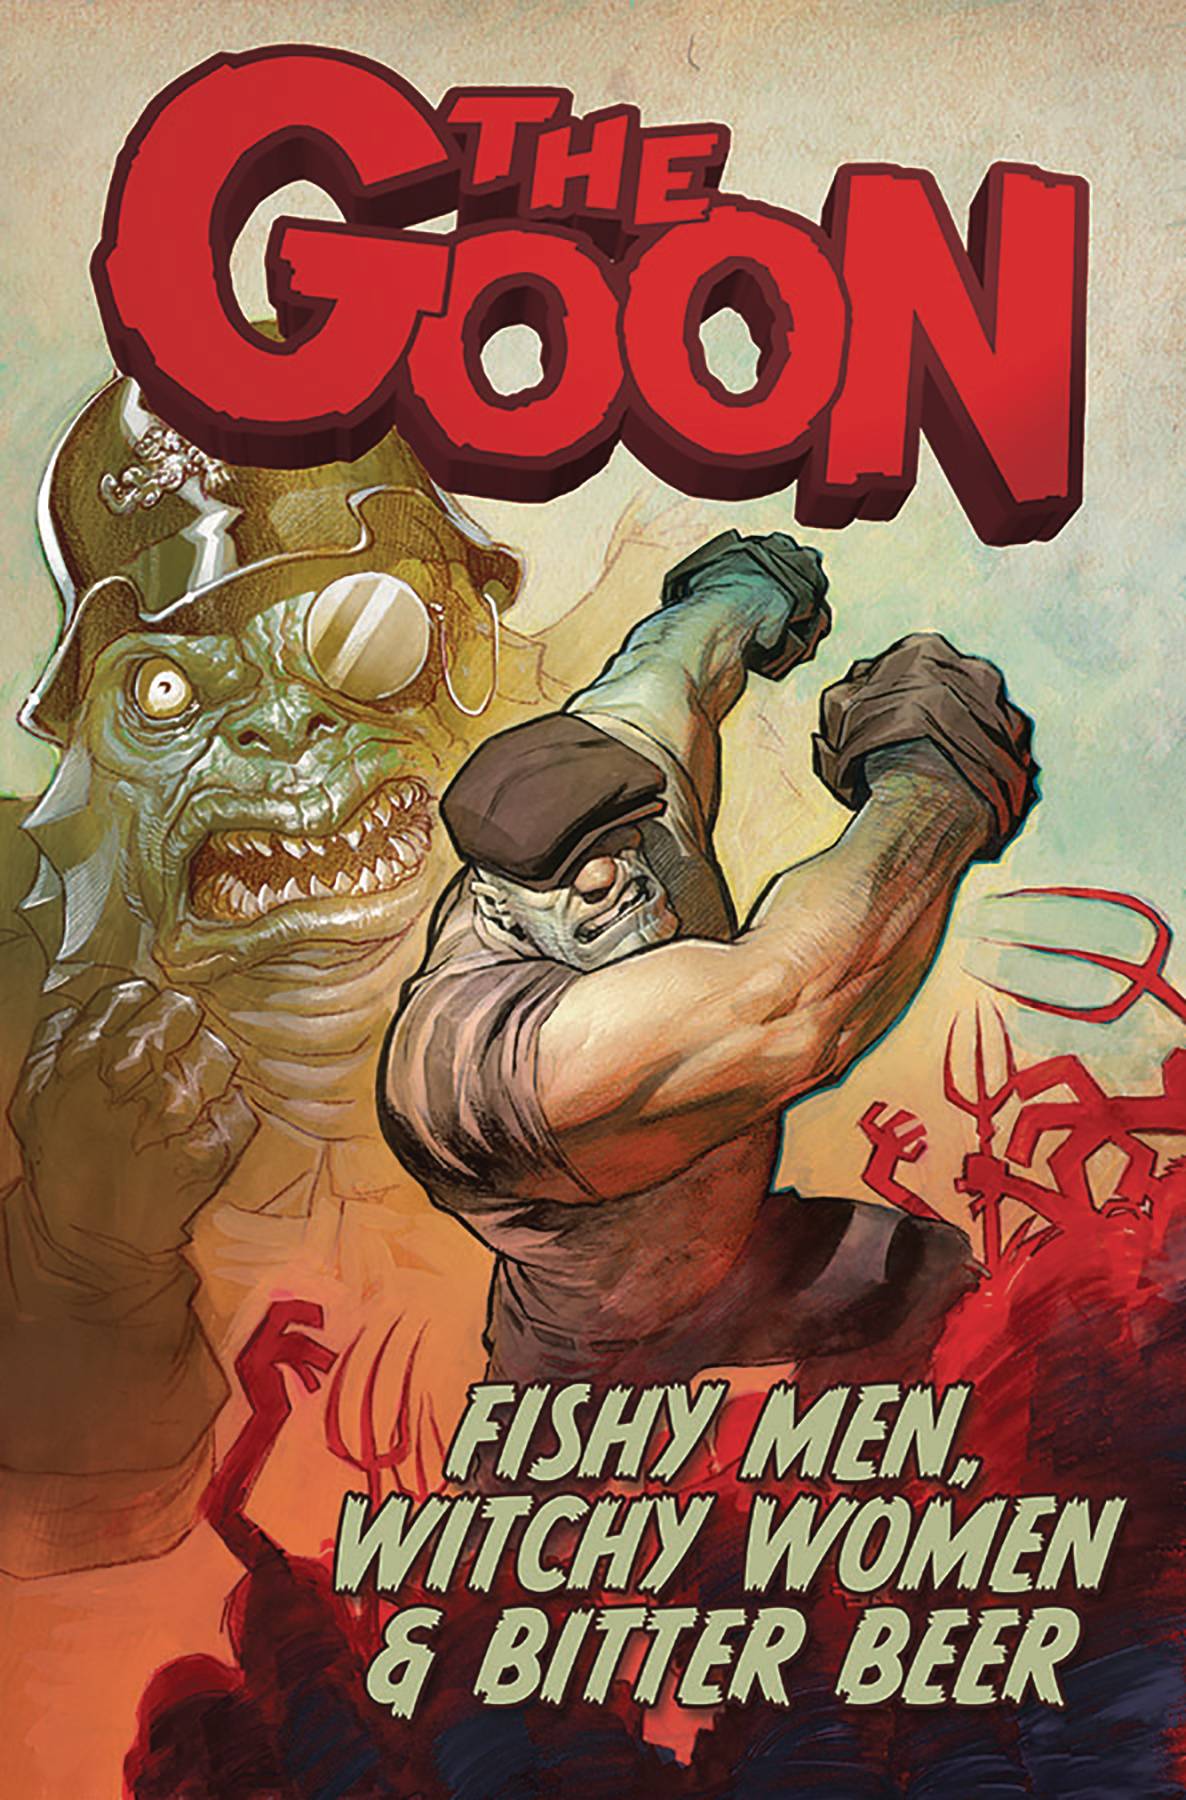 GOON TP 03 FISHY MEN WITCHY WOMEN & BITTER BEER